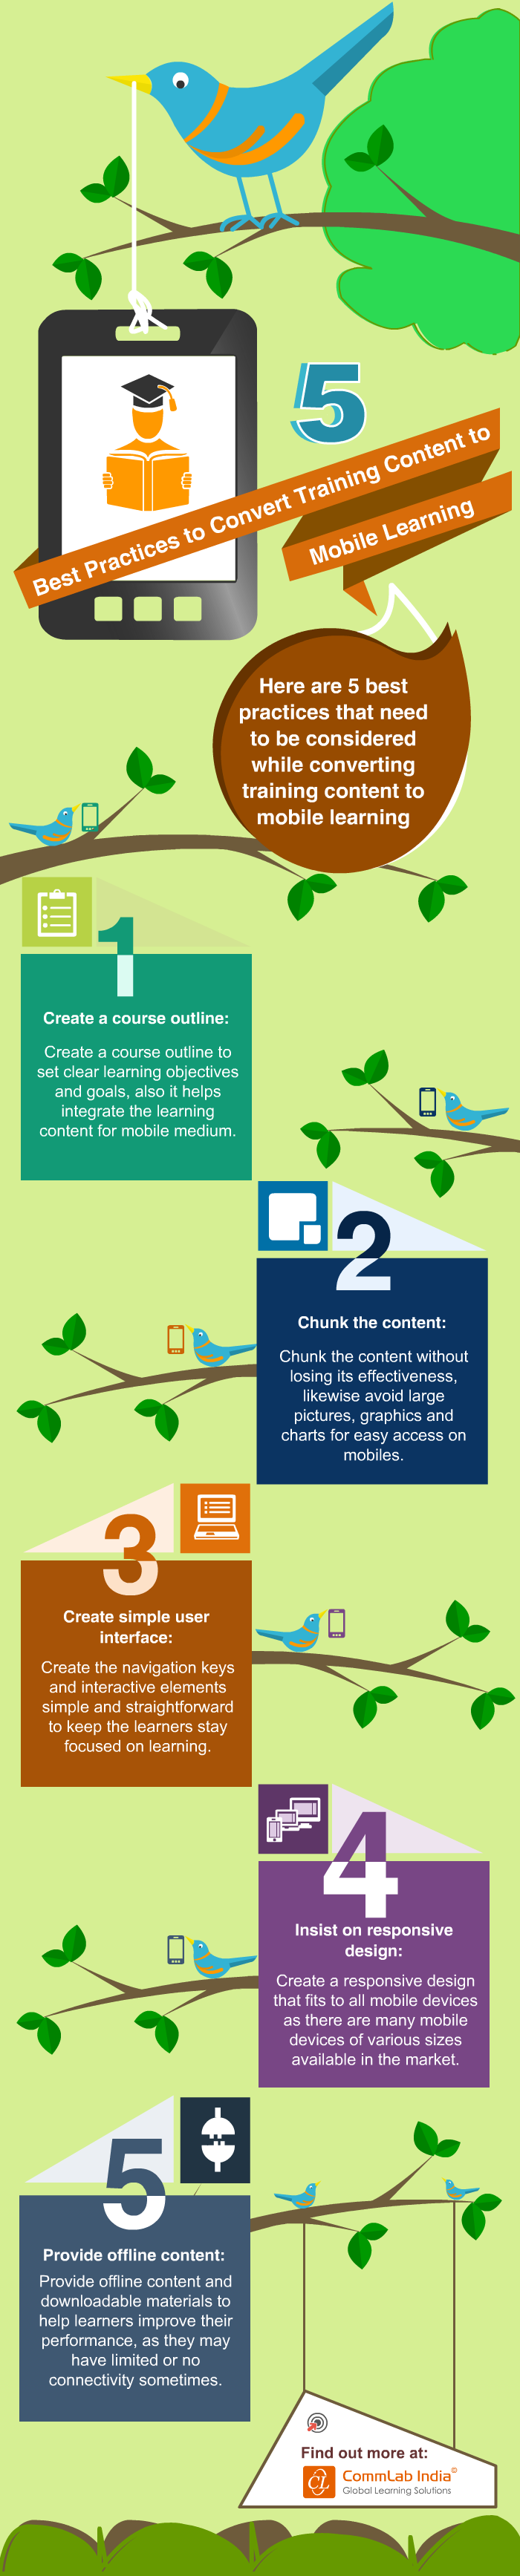 5 Best Practices to Convert Training Content to Mobile Learning [Infographic]